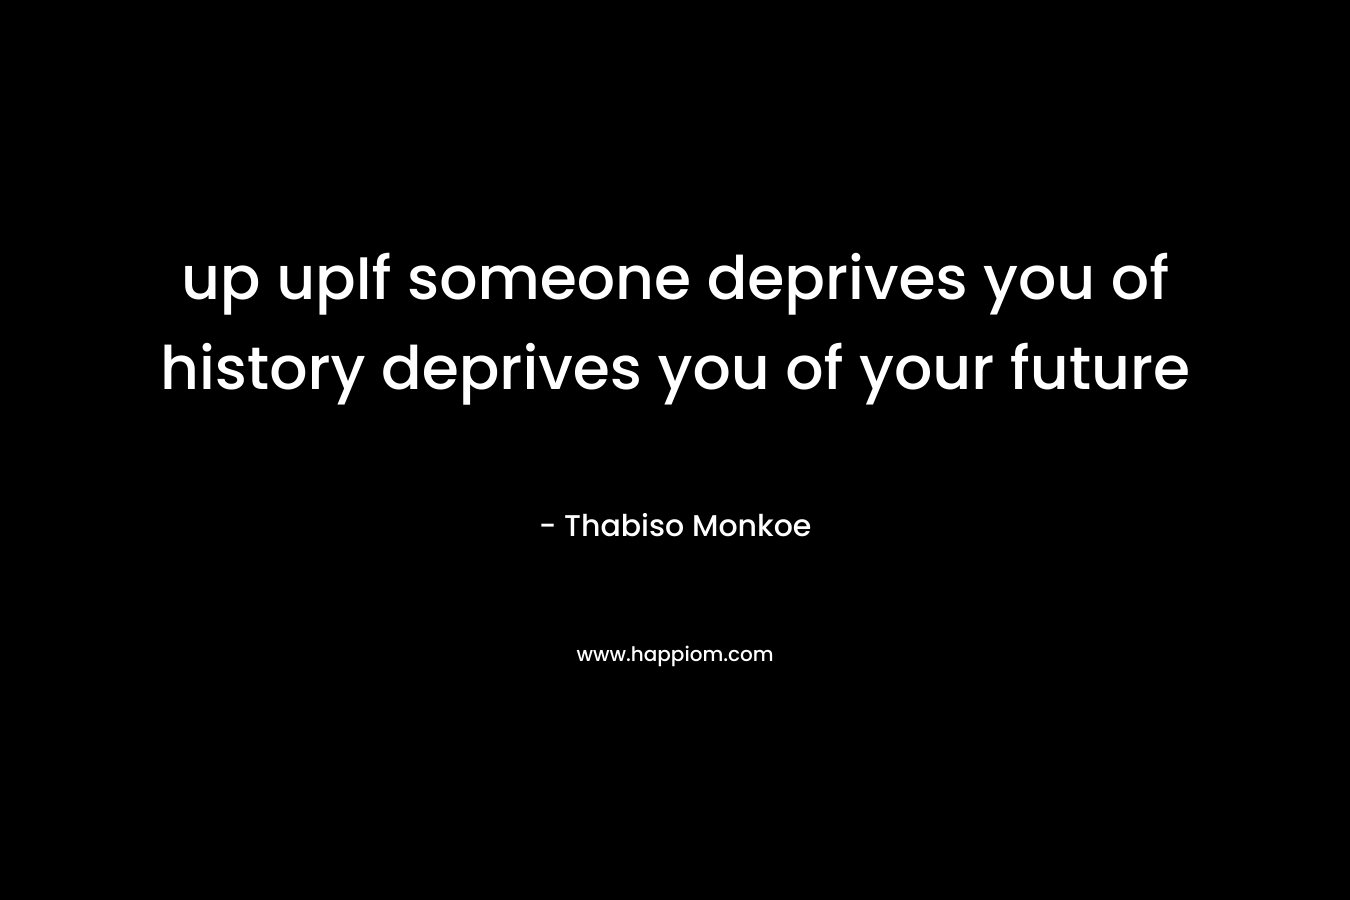 up upIf someone deprives you of history deprives you of your future – Thabiso Monkoe